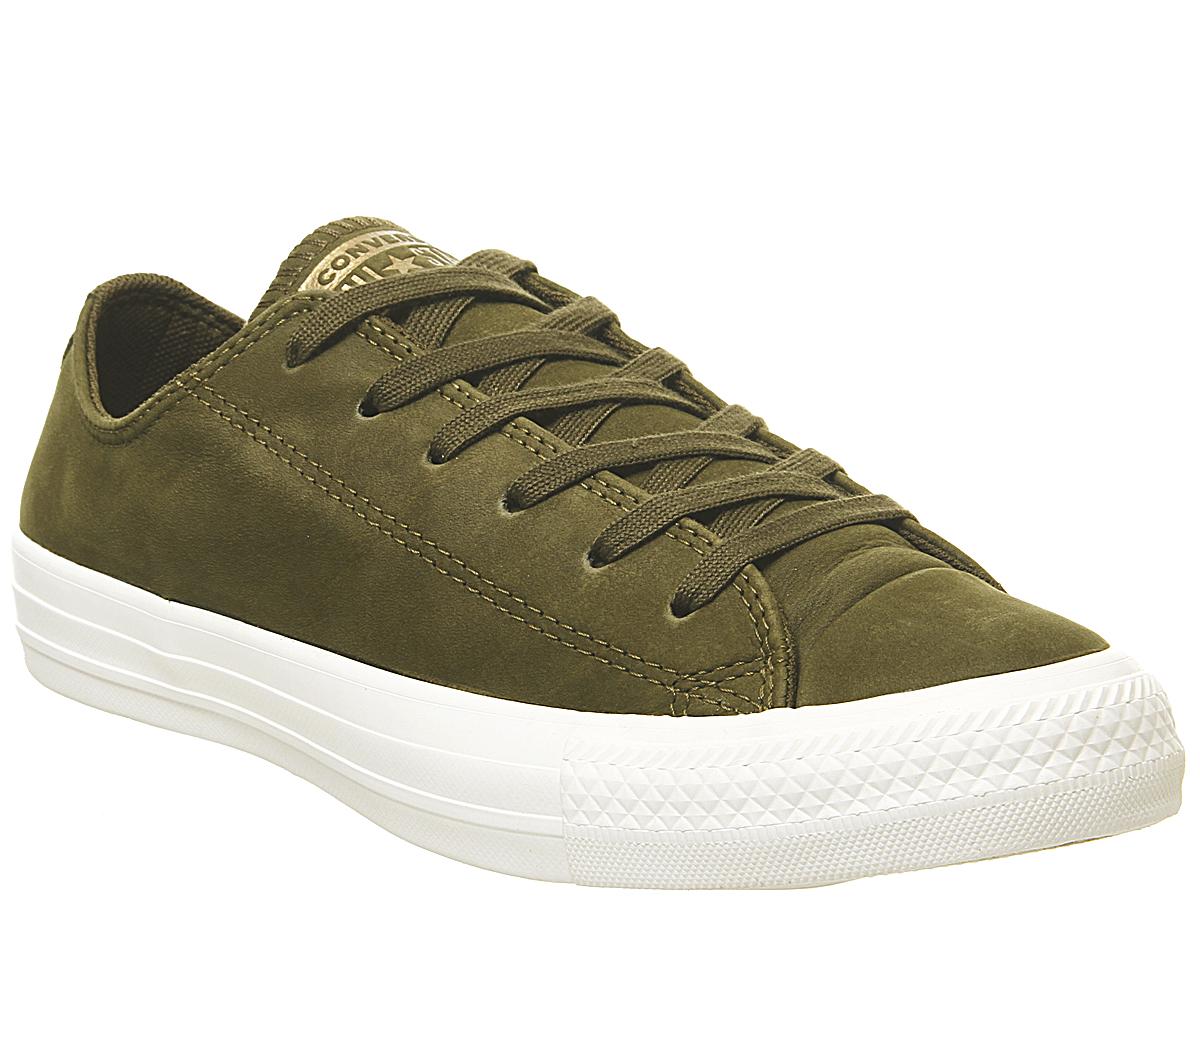 converse all star olive green